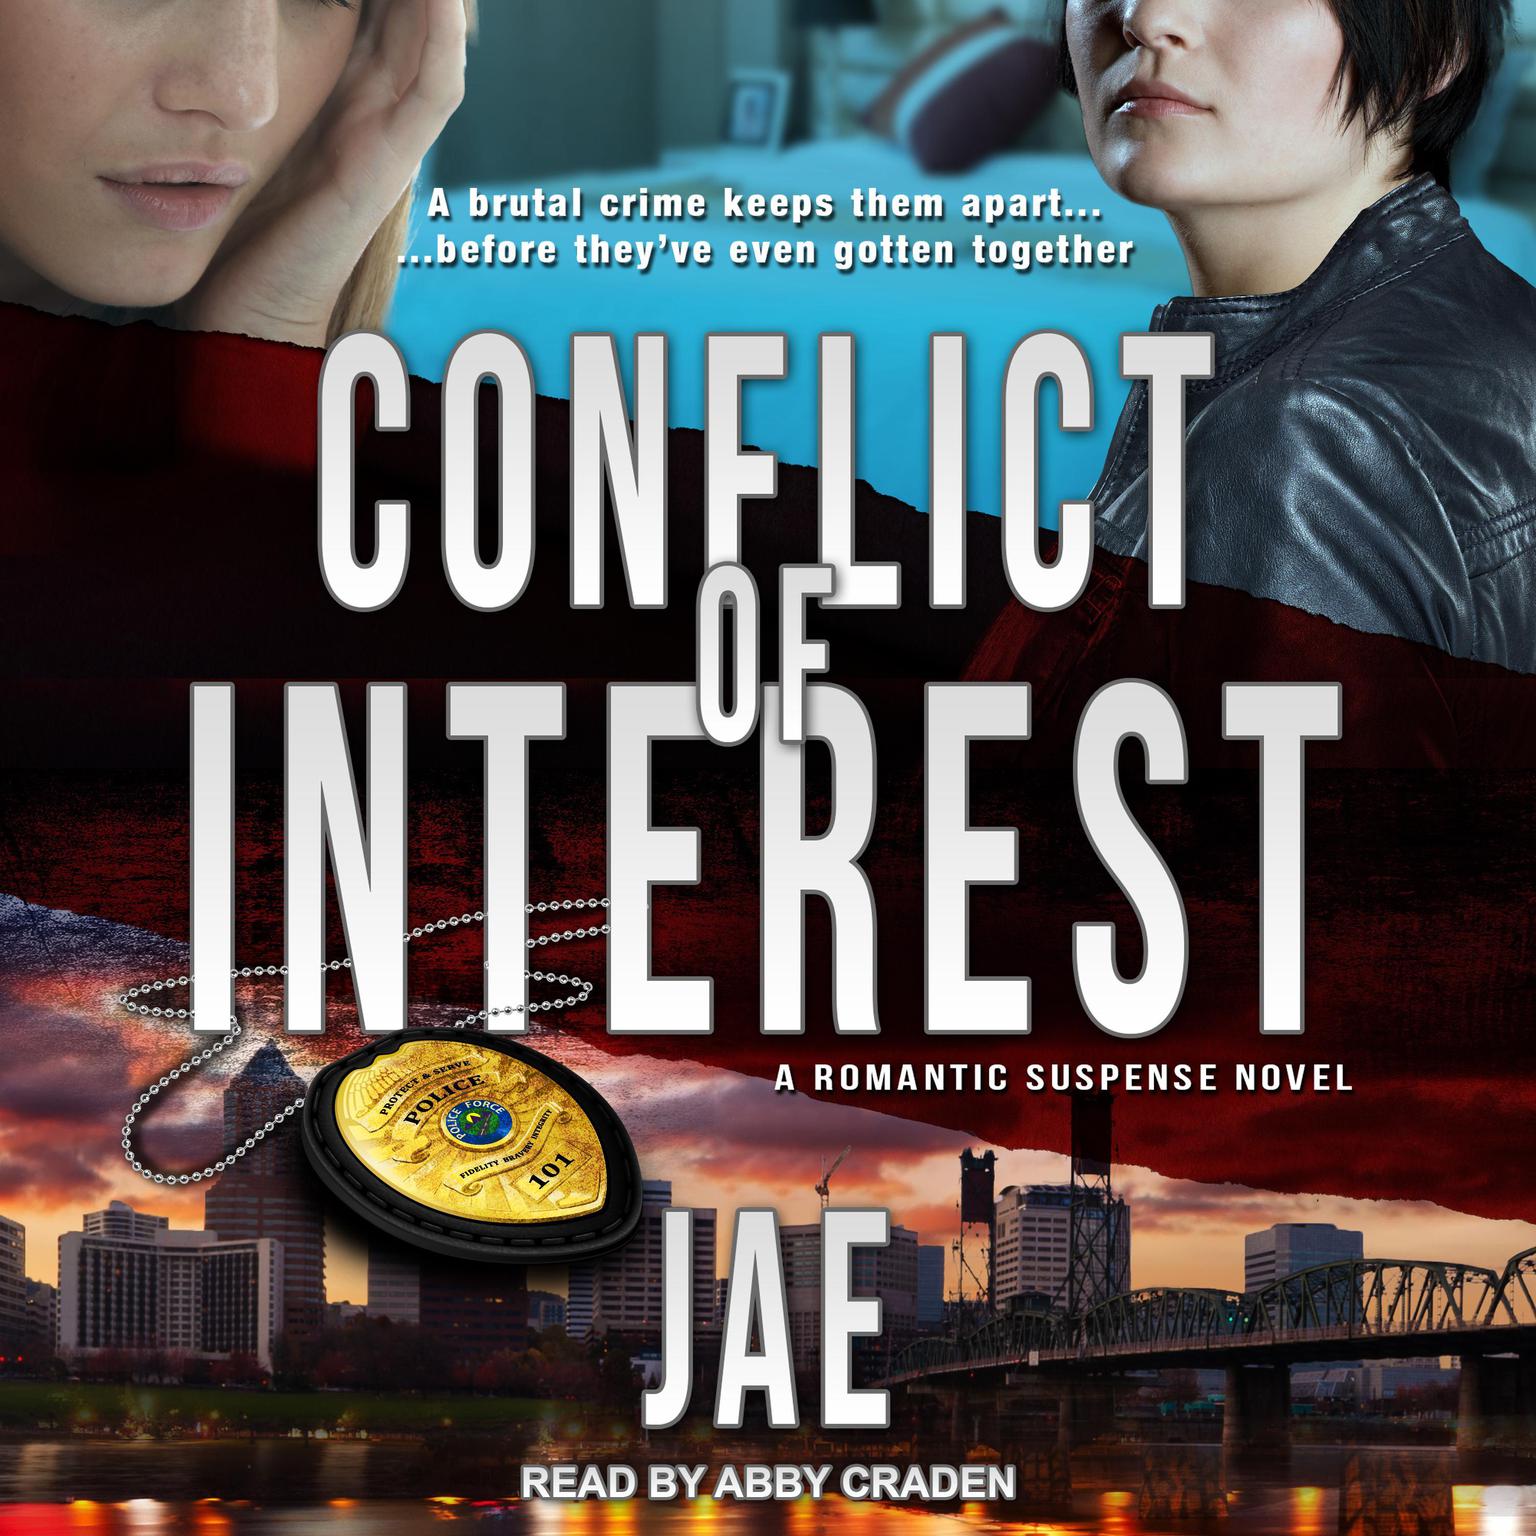 Conflict of Interest Audiobook, by Jae